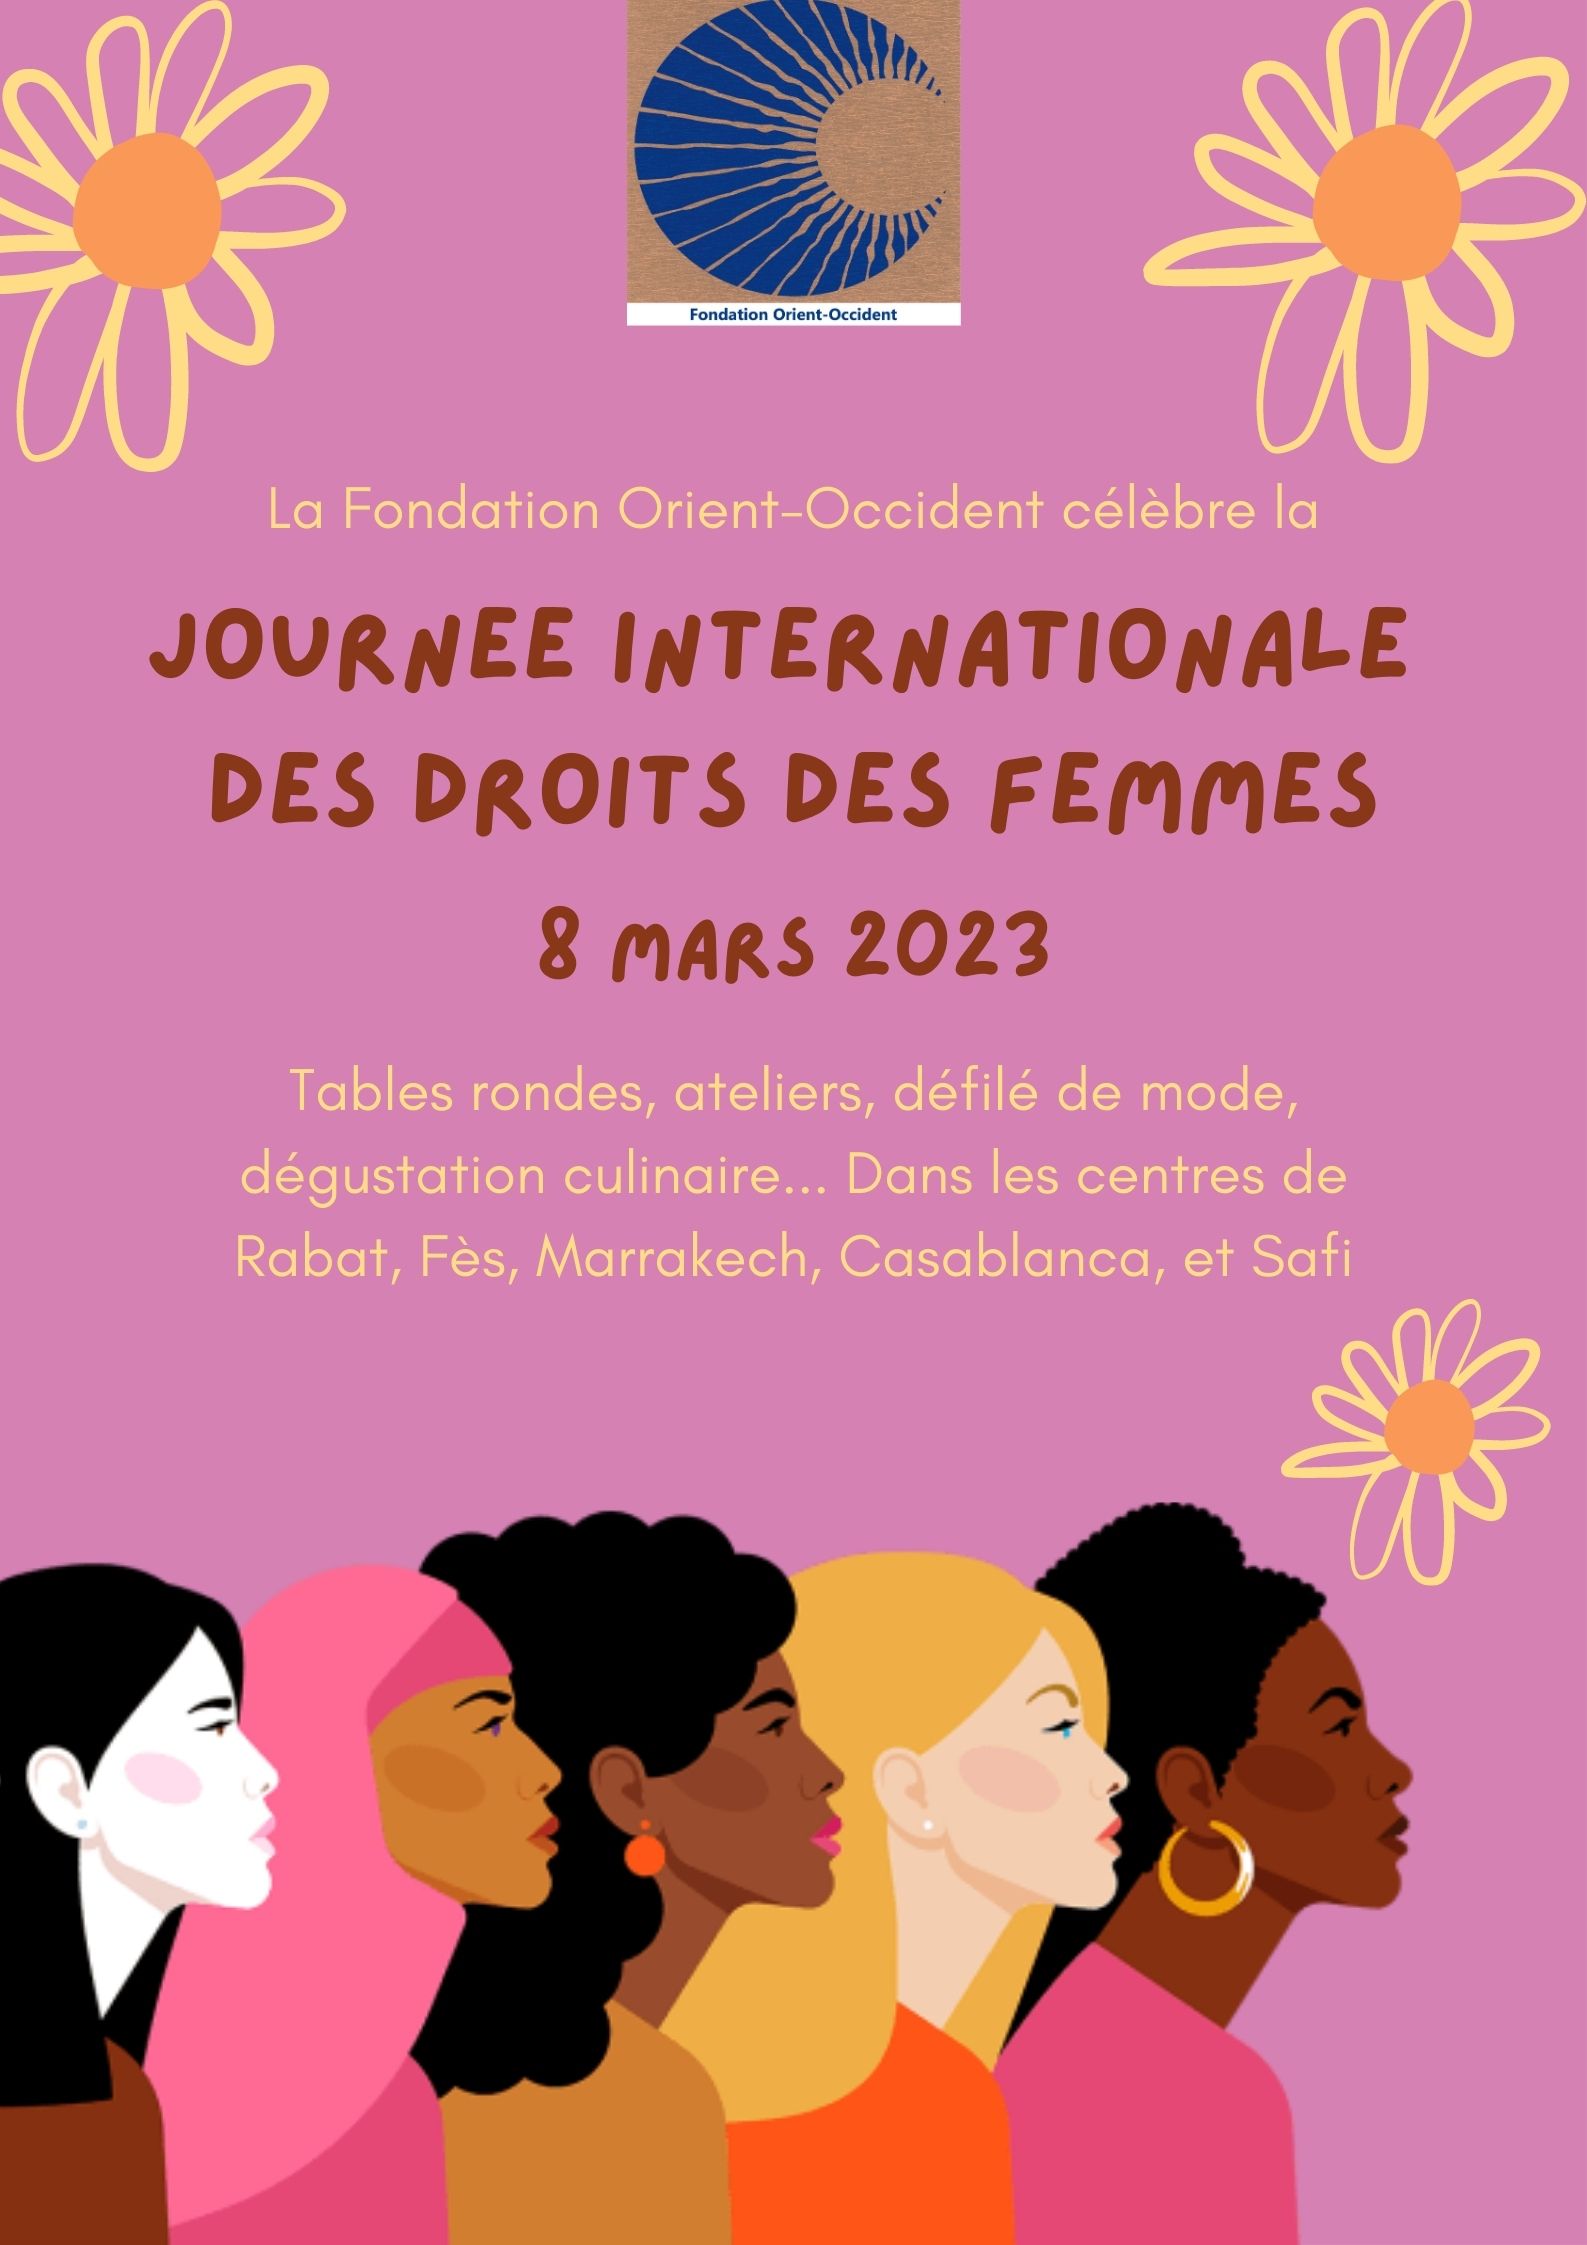 International Women’s Day 2023 at the Fondation Orient-Occident